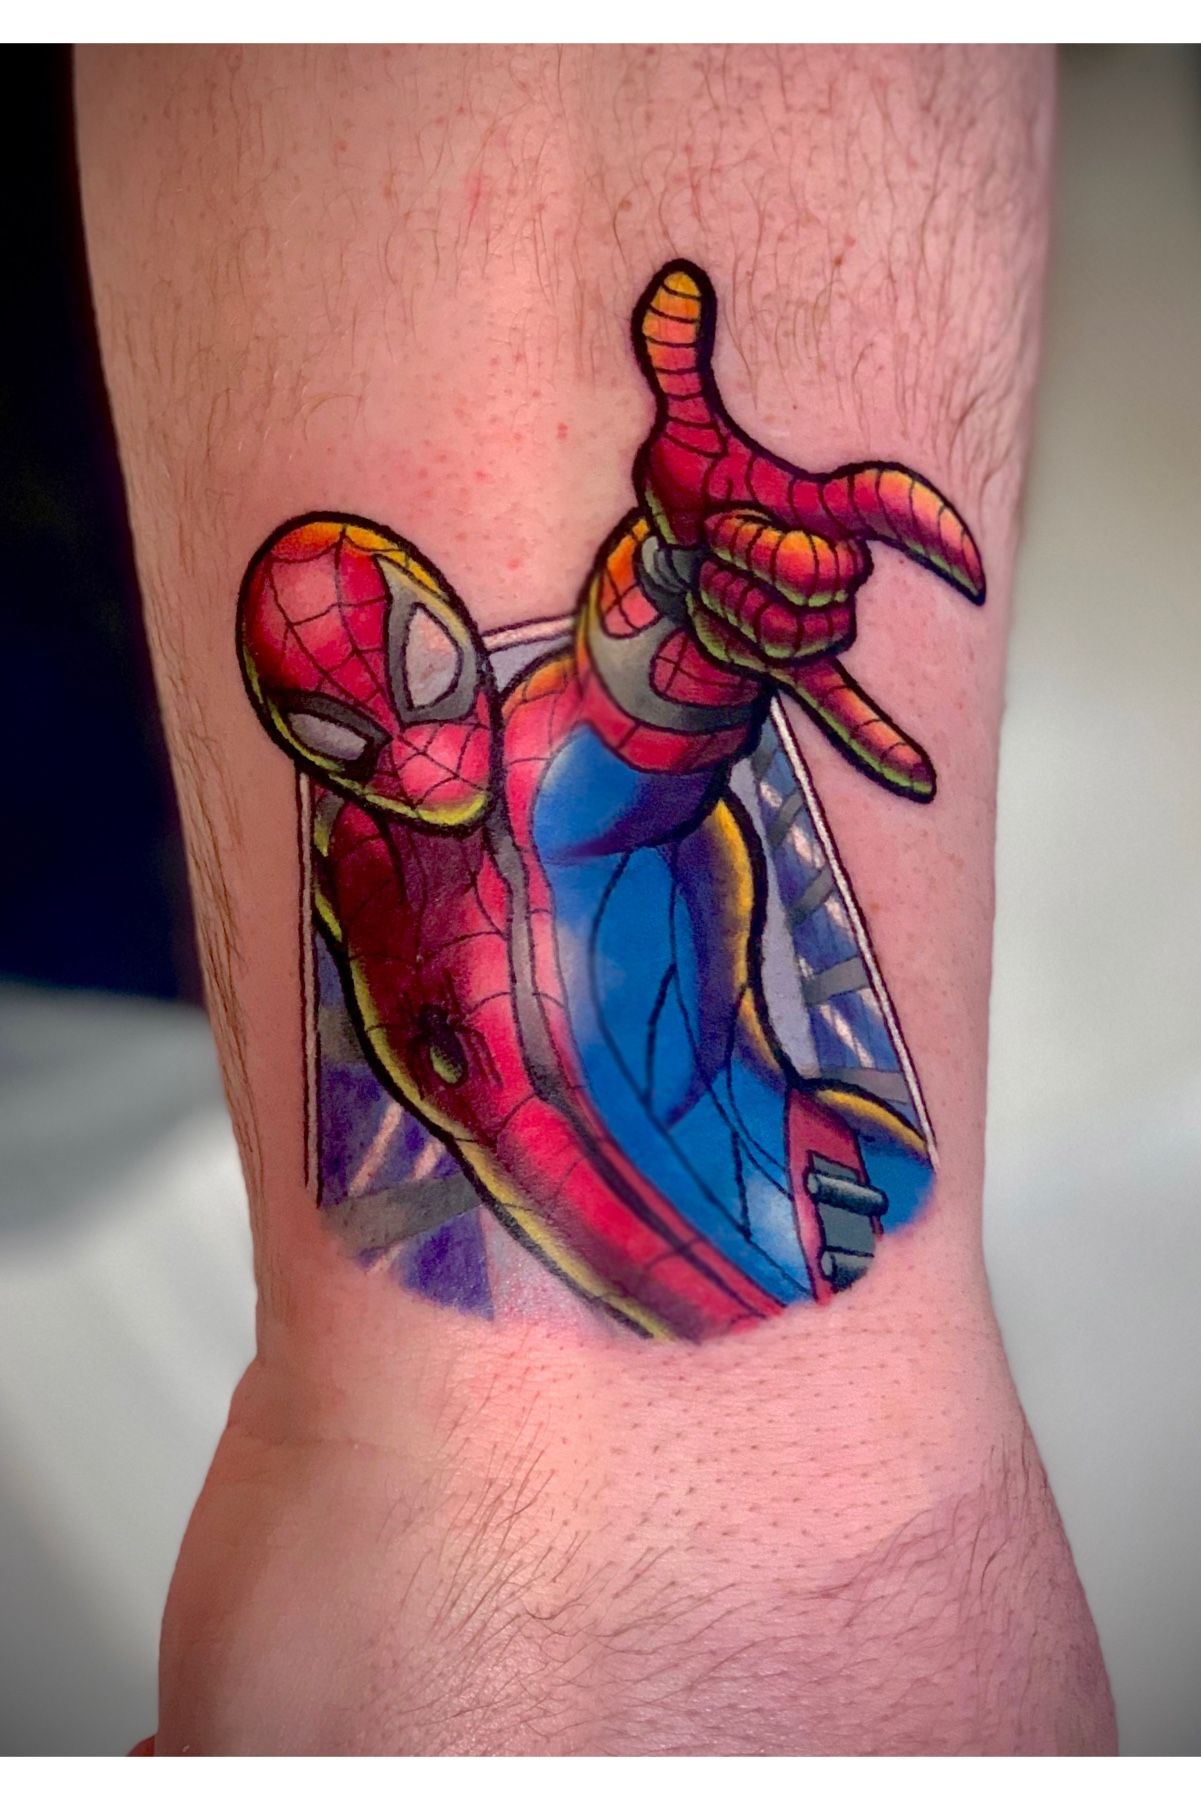 The Tattoo Shop on X Obsessed with this Spiderman Vs Venom piece by  davepaulotattooartist  tattoorealistic tattoo spiderman venom  marvel colortattoo colortattoos marveltattoo spidermantattoo  venomtattoo tattooshopsupplies tattooshop 